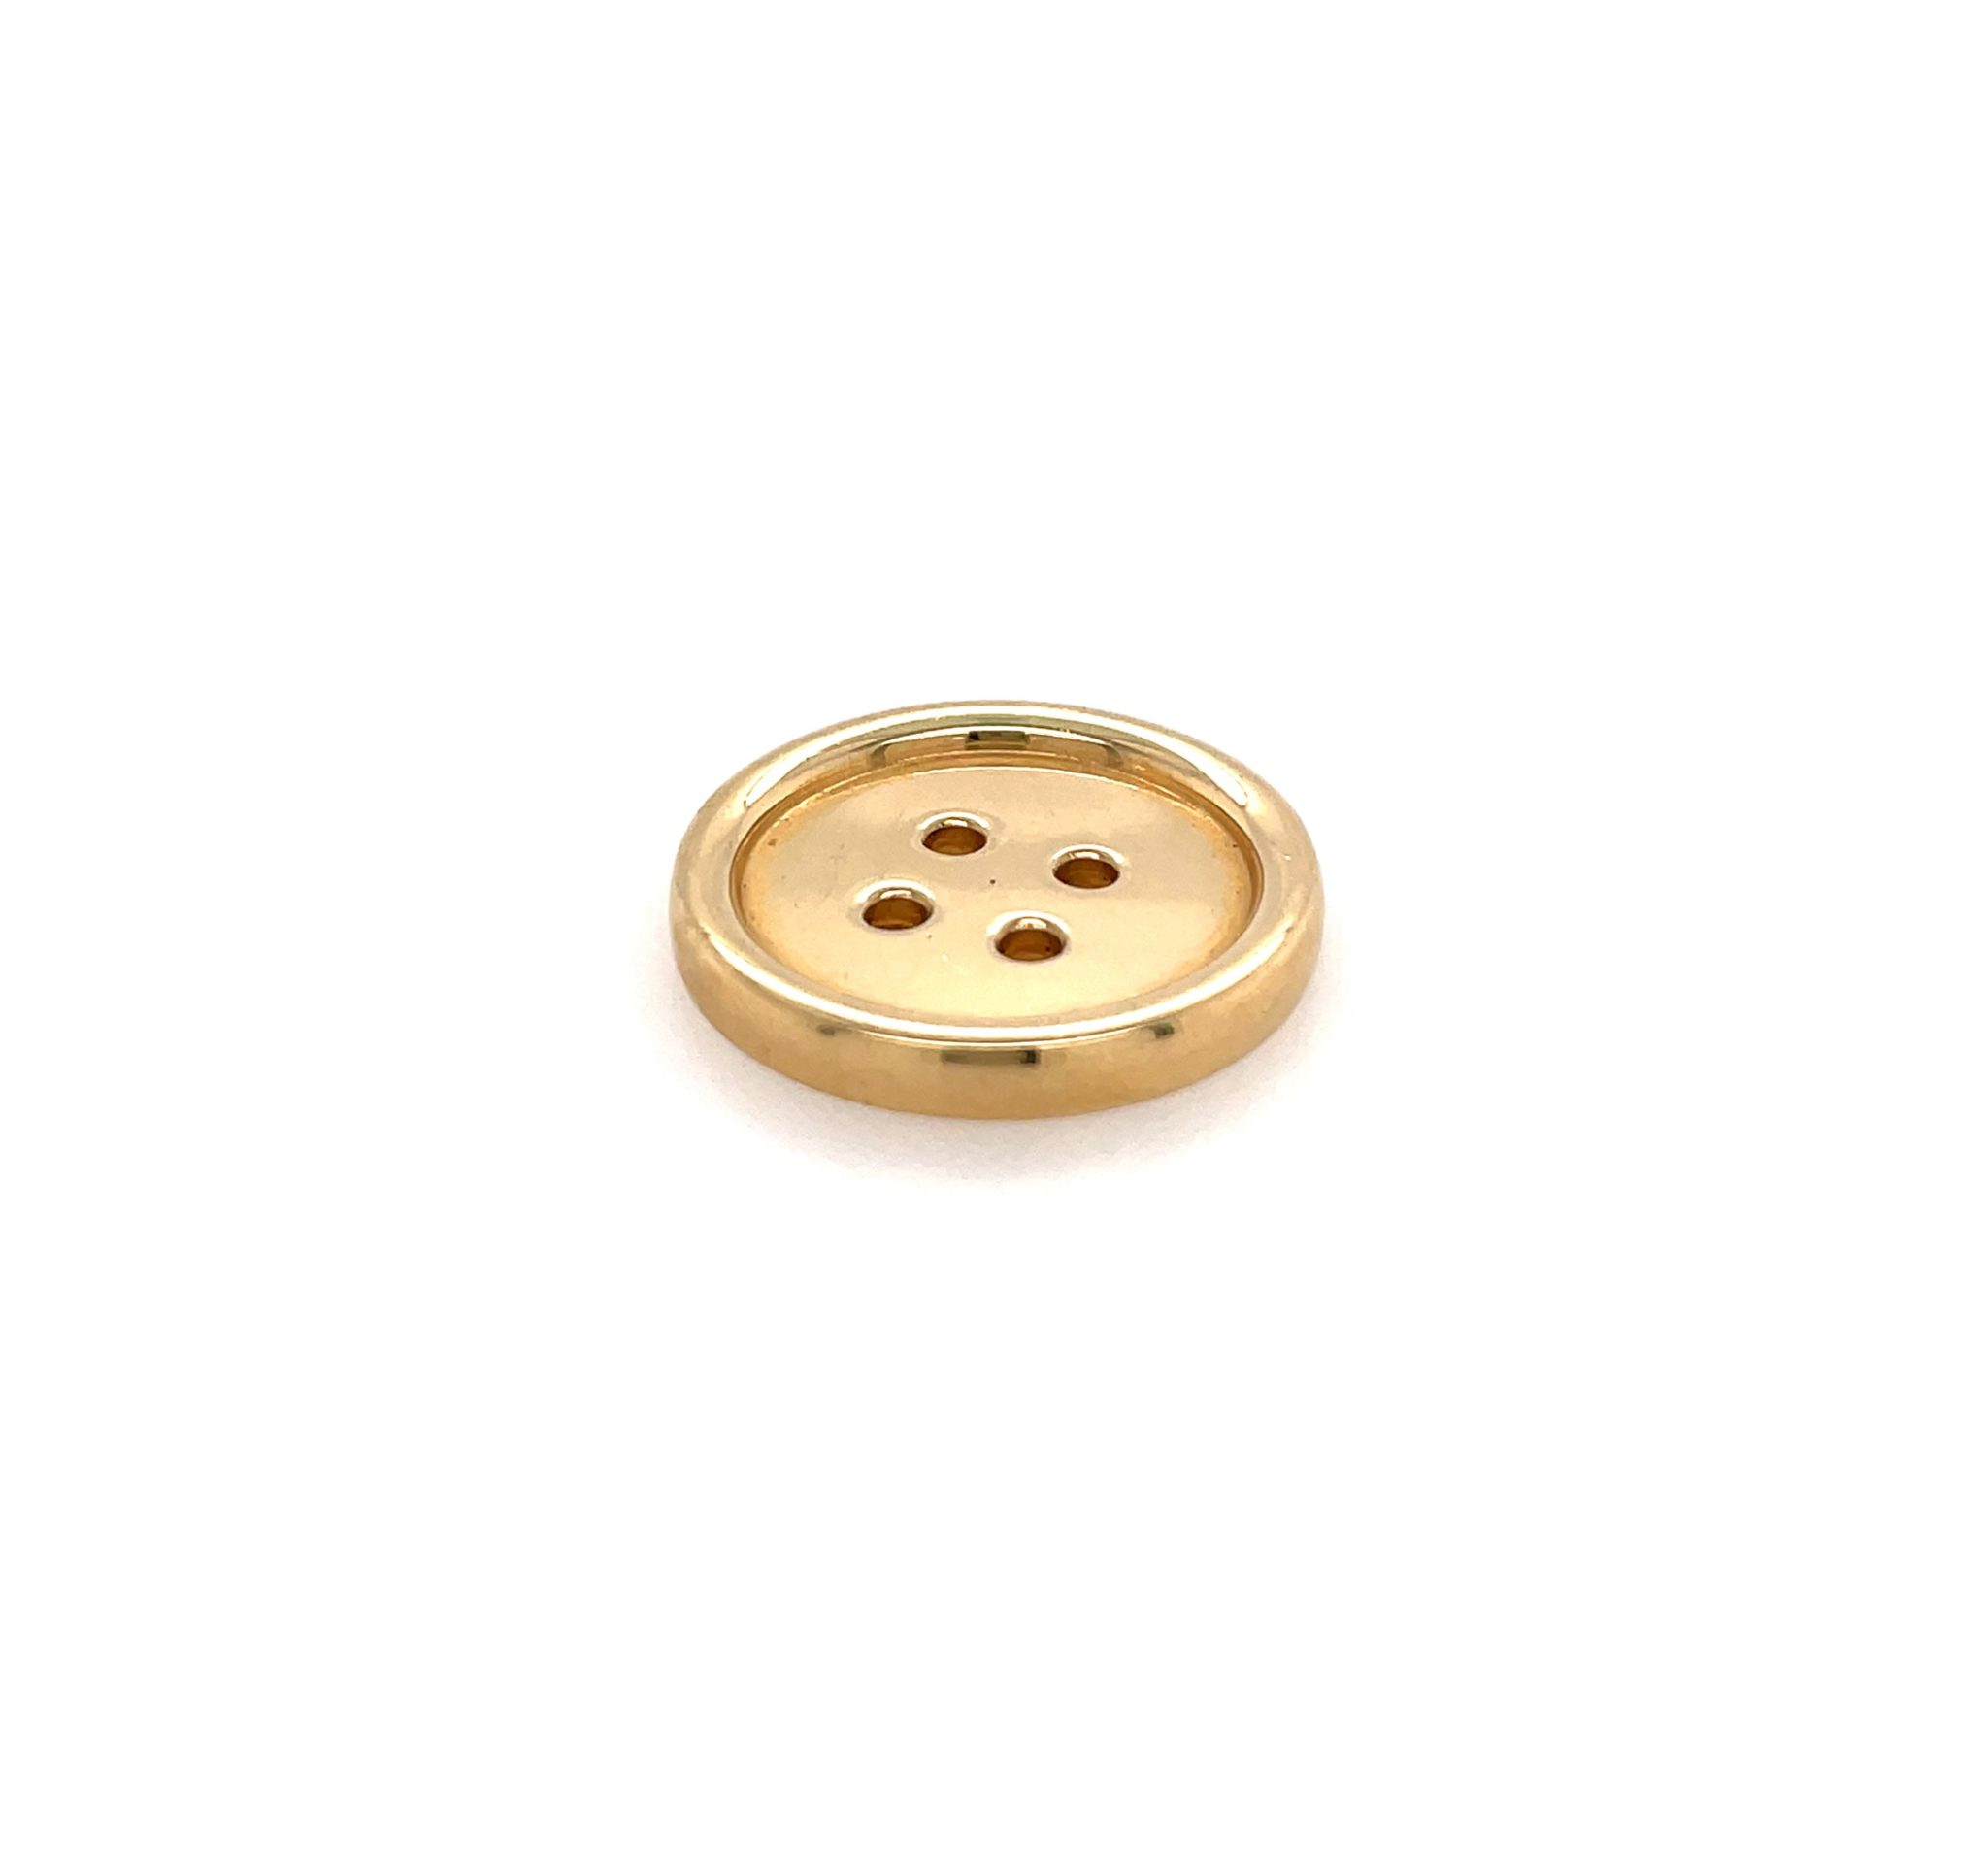 Tiffany & Co. "Button" ⌀ 19,4 mm Gelbgold 585/ 14K